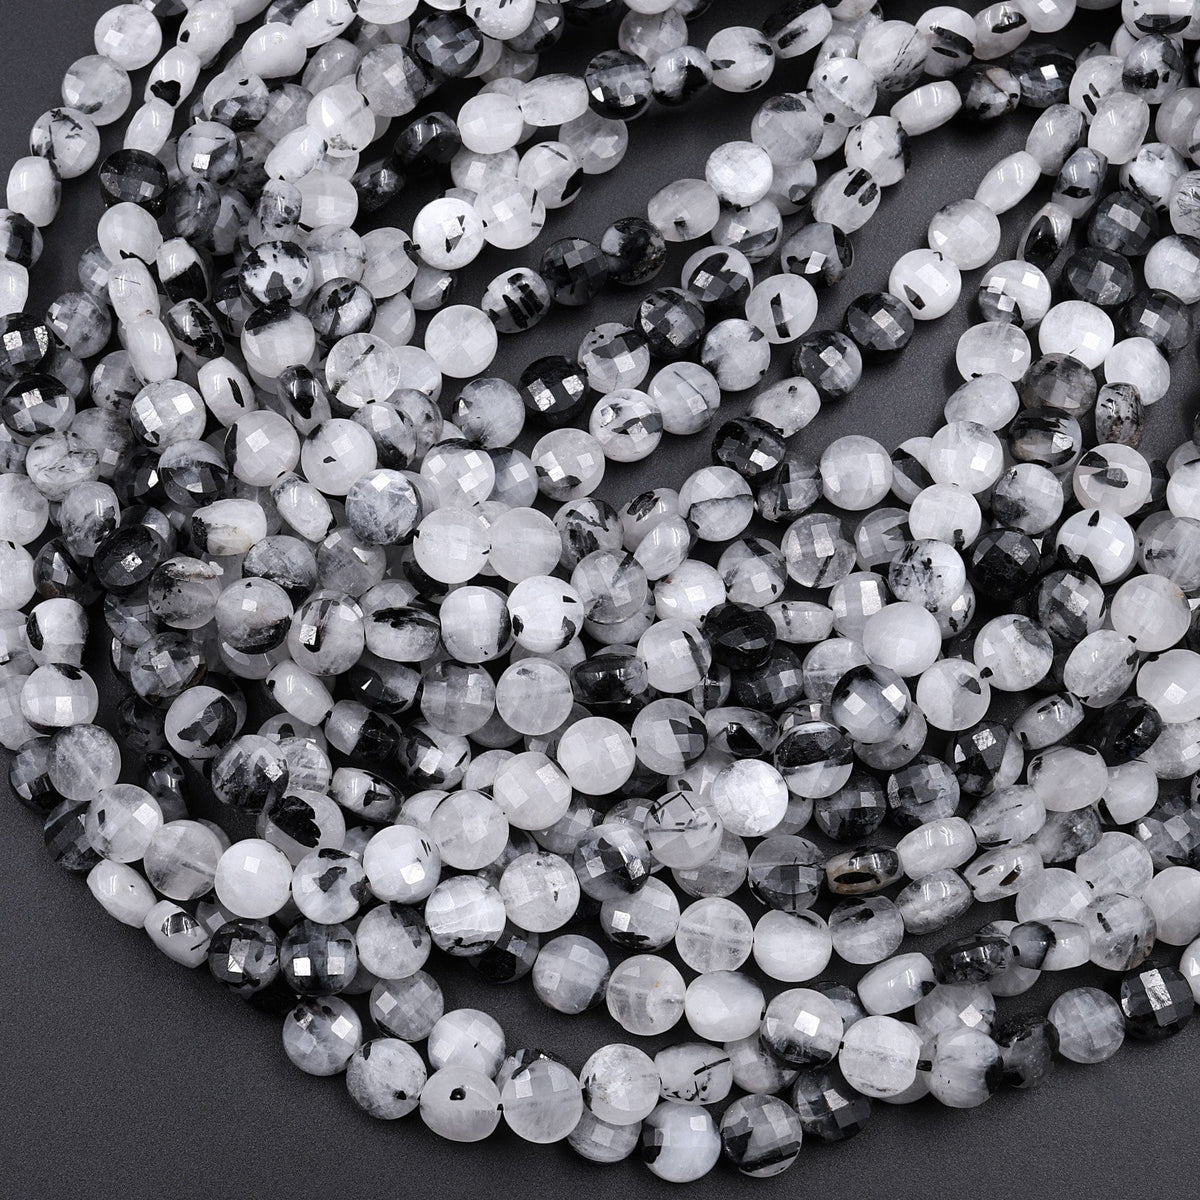 Rutilated Quartz Faceted Star Cut Shape Beads Black and White Stone Beads  for Bracelets Wholesale Craft Supplies Jewelry Making Ideas 